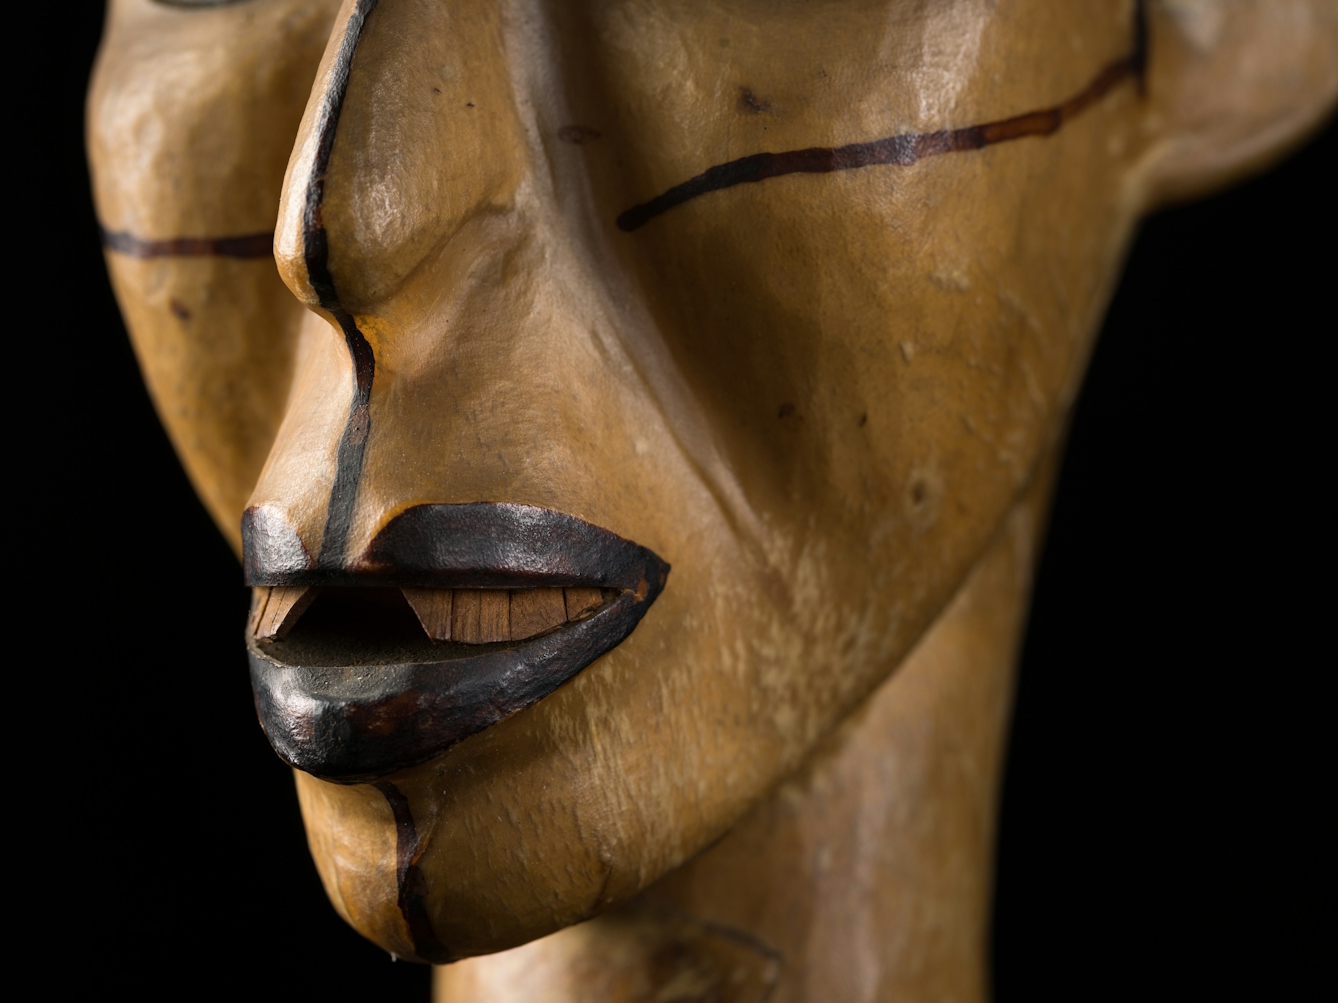 Photograph of the carved wooden head of a woman against a black background. The image shows a close-up detail of her nose and mouth.